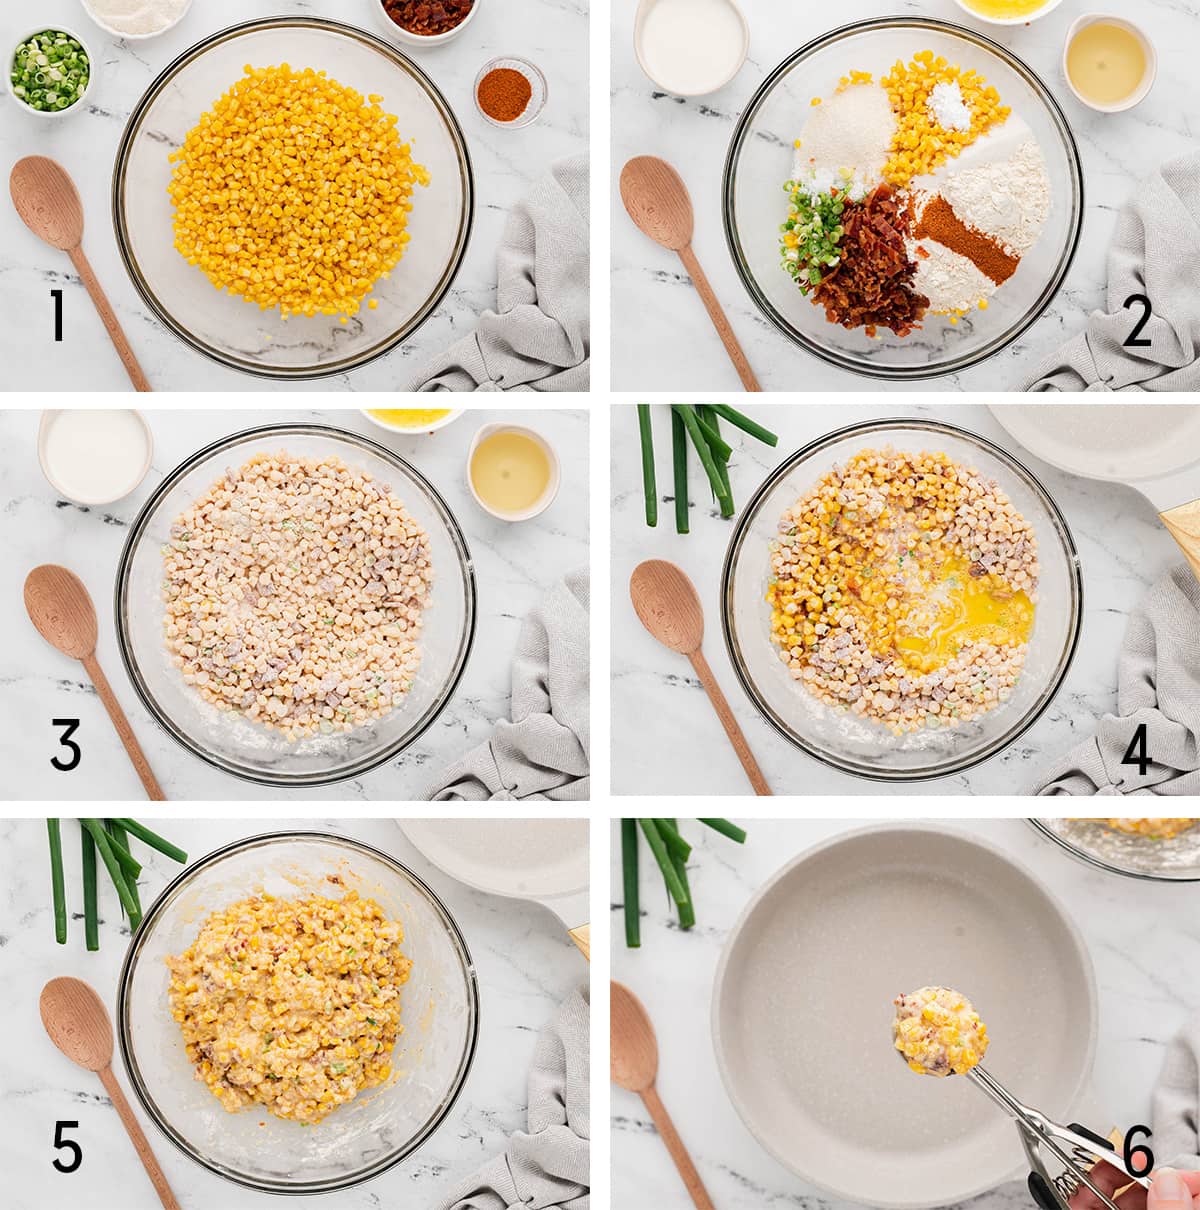 Collage of images showing how to make mini corn cakes.